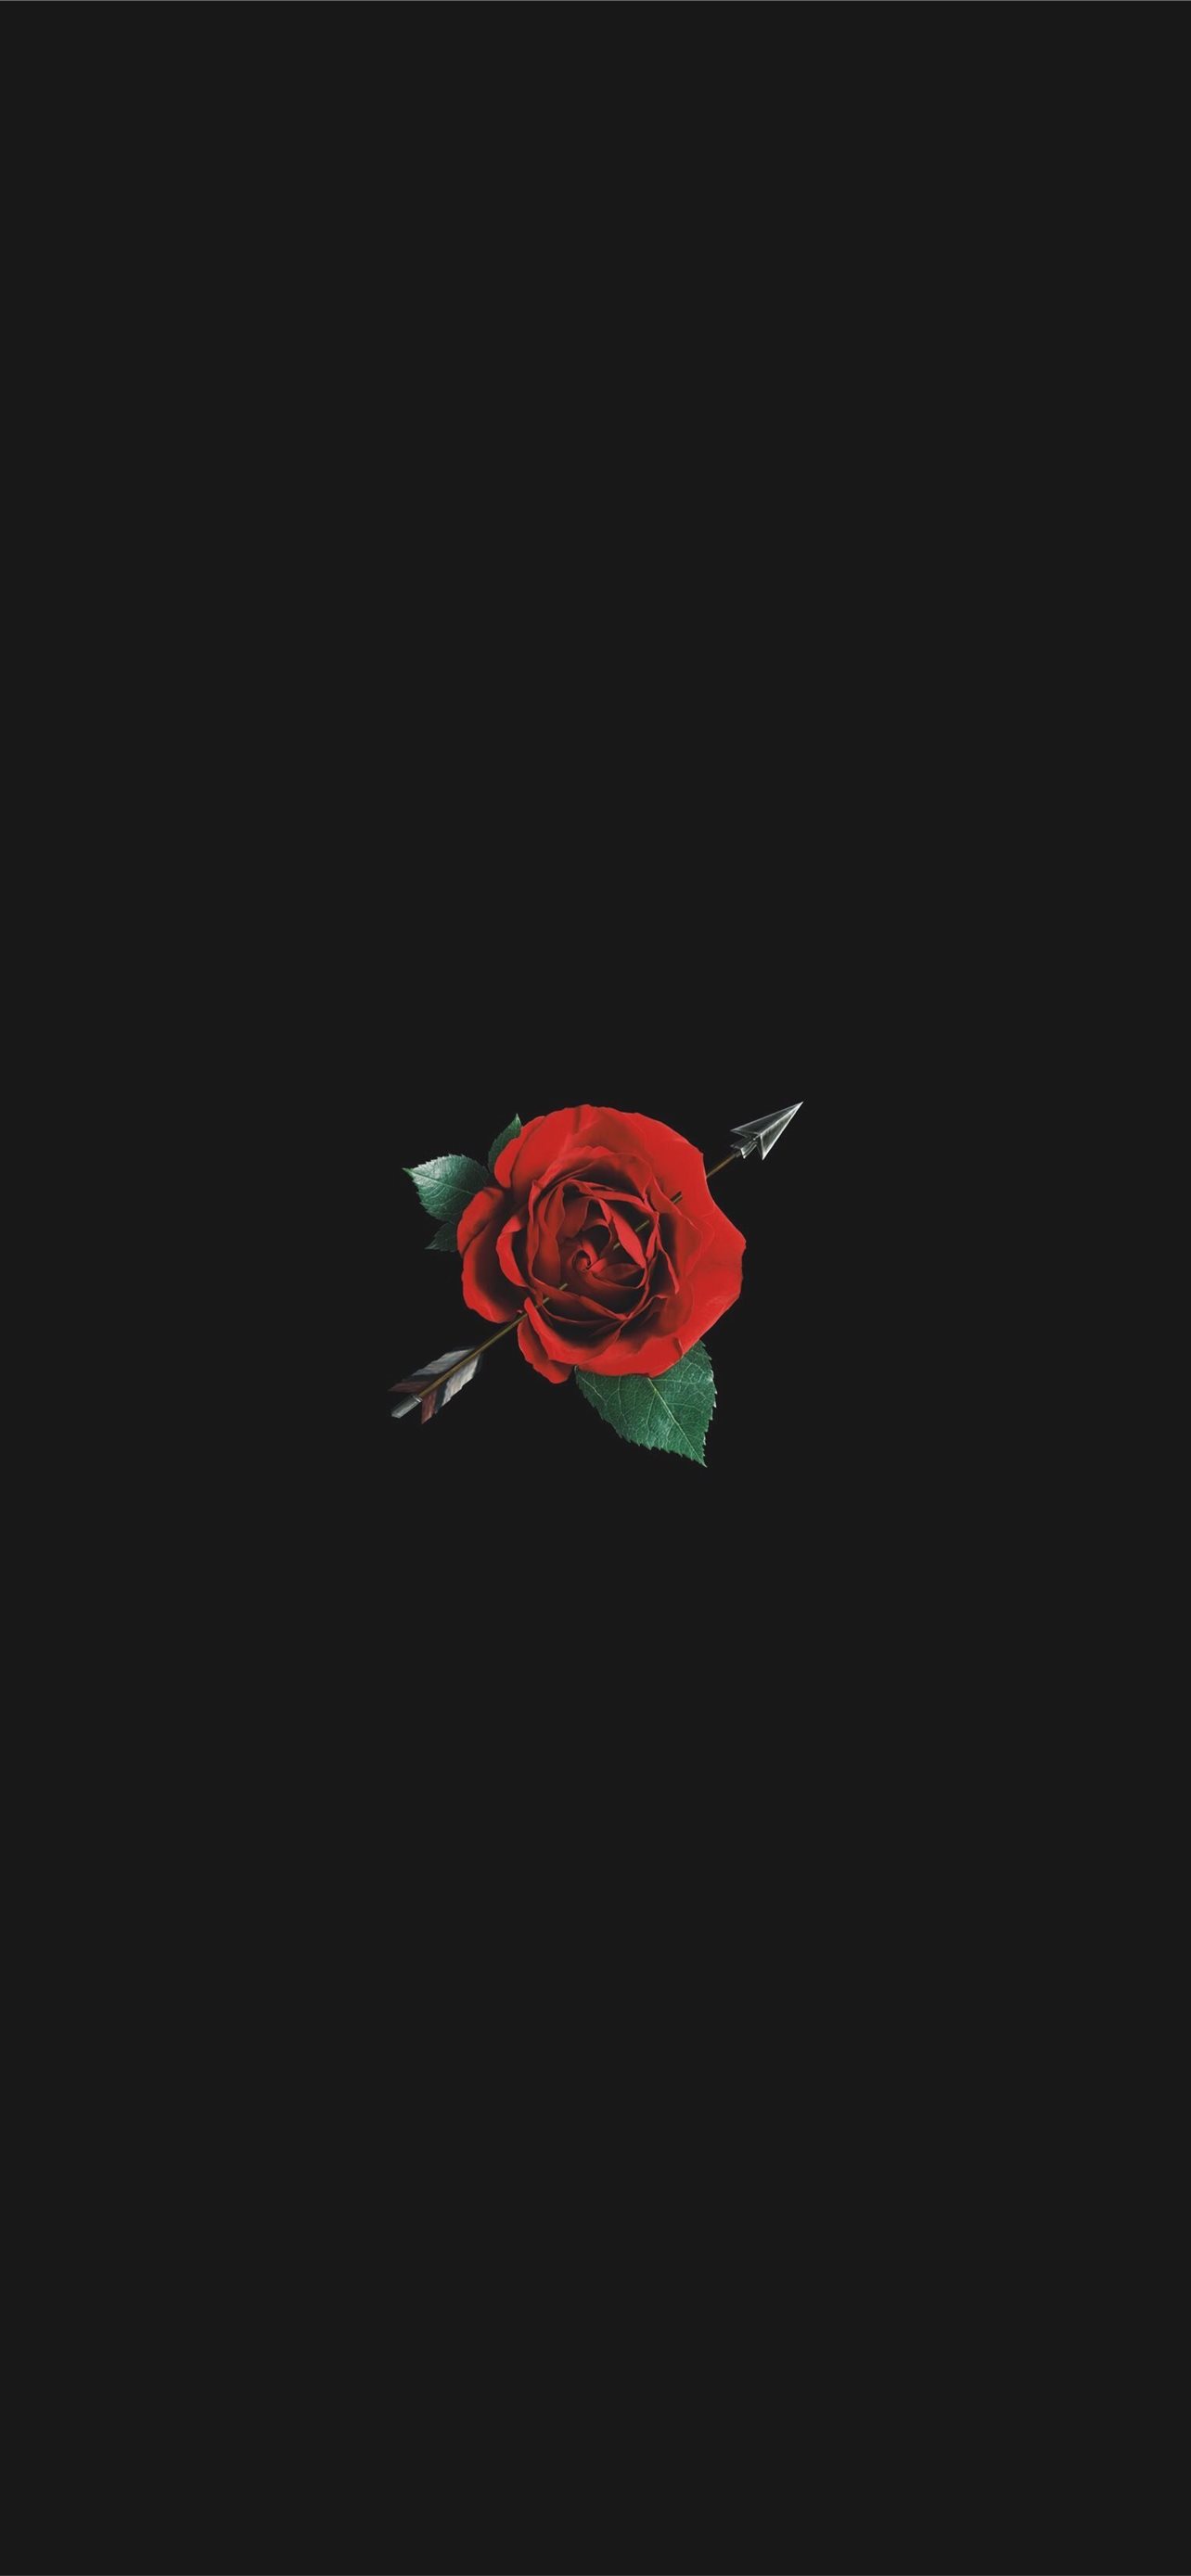 Fire Rose IPhone Wallpaper HD  IPhone Wallpapers  iPhone Wallpapers